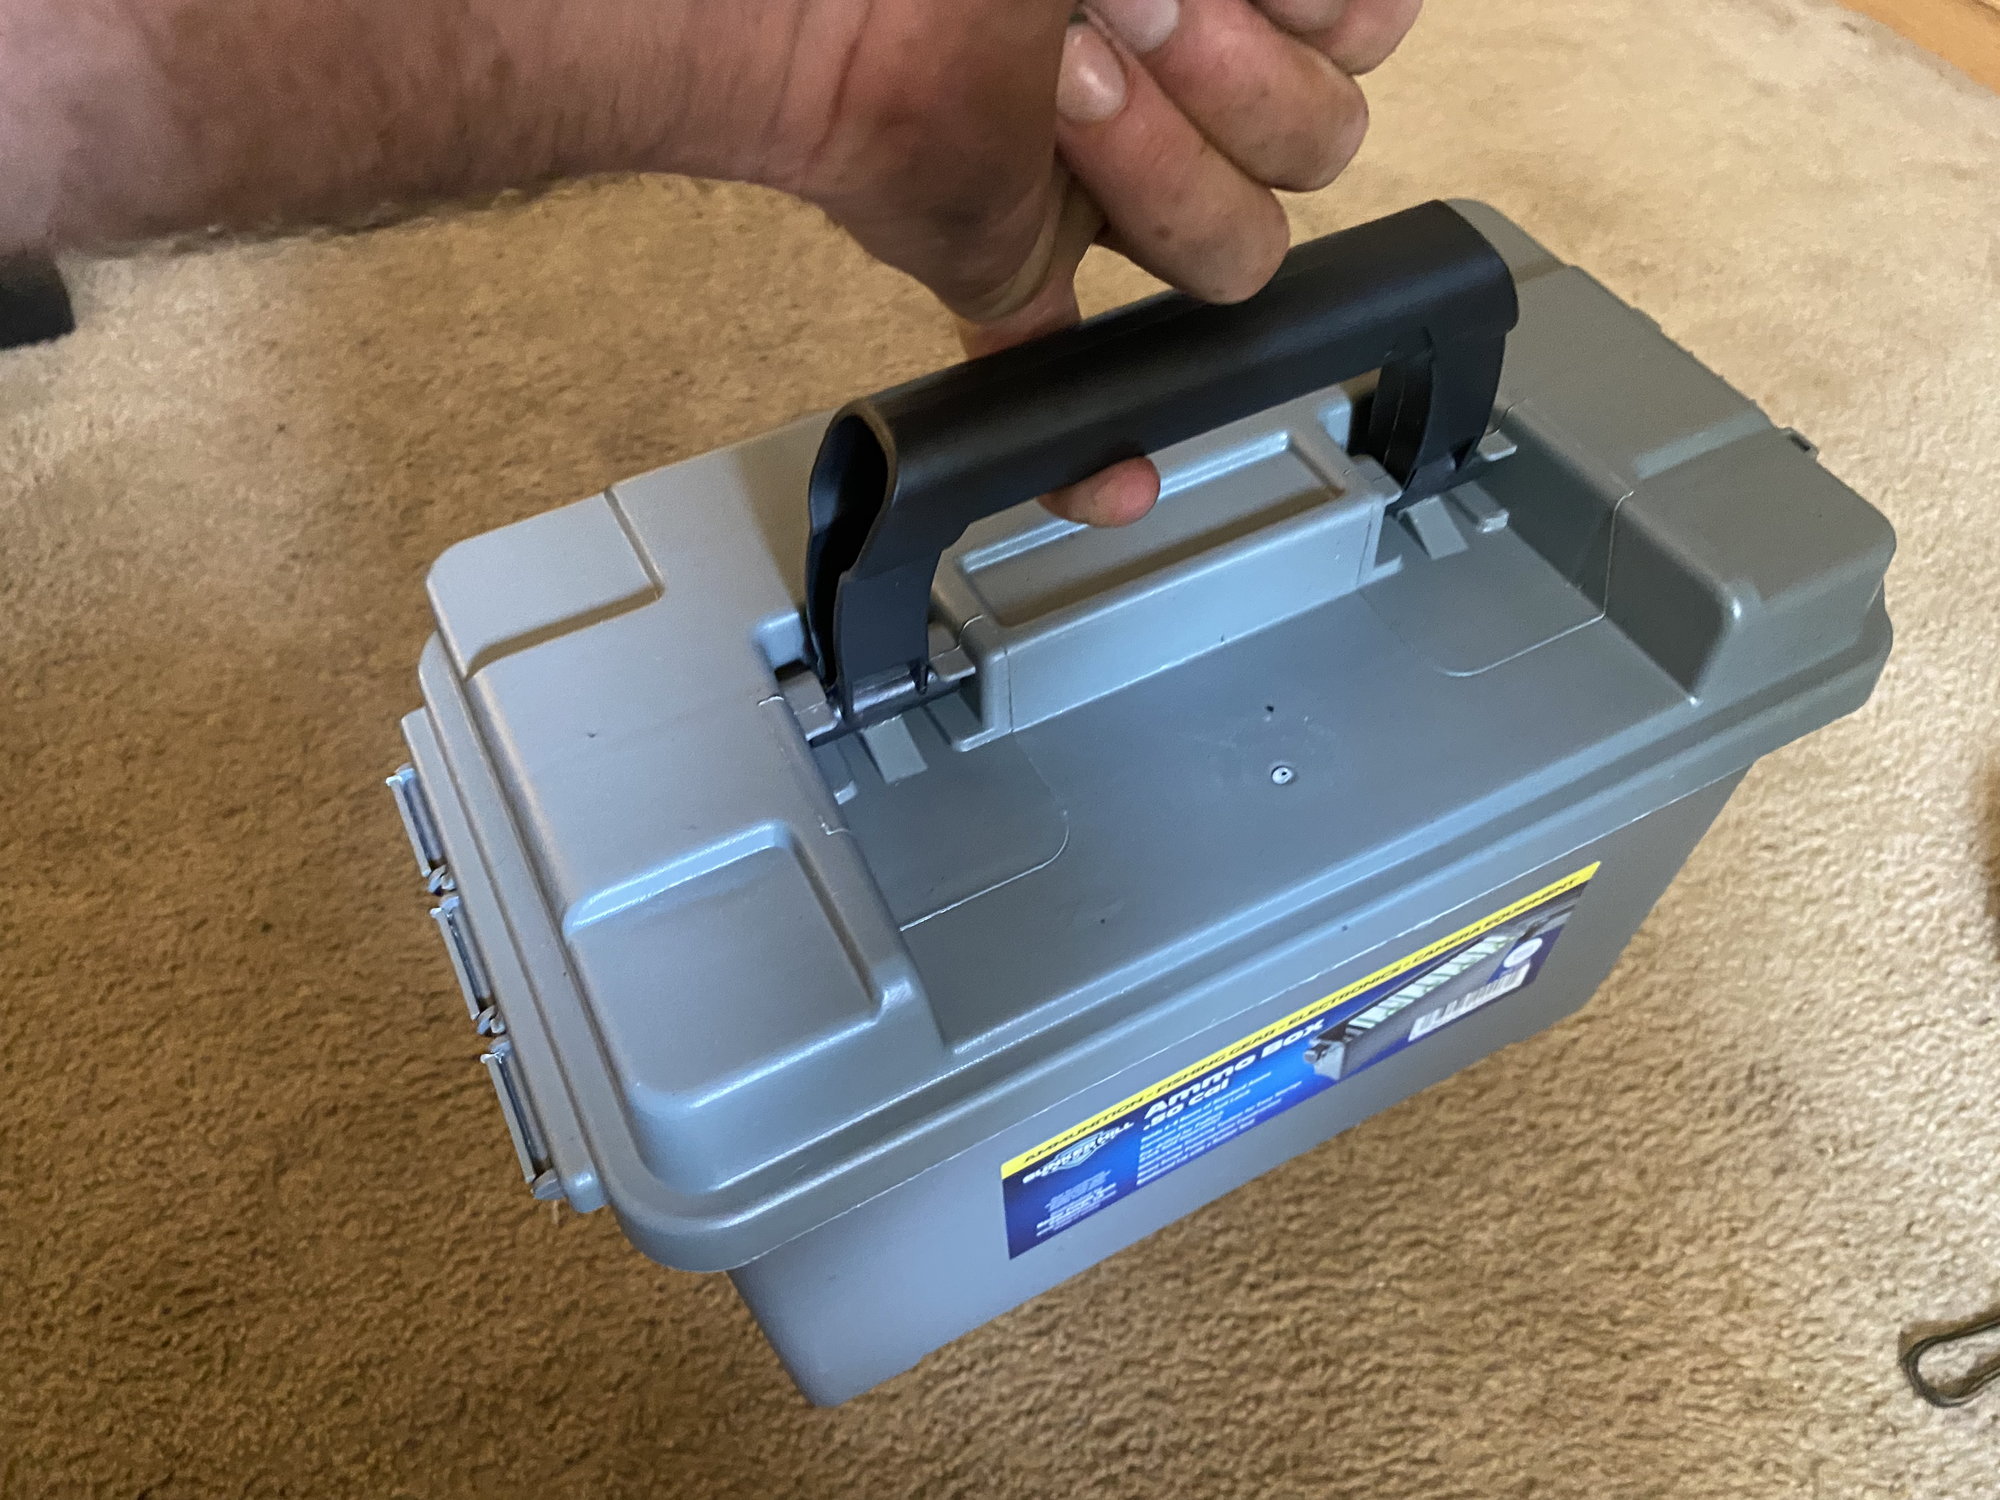 Portable Electric Reel Batteries? - The Hull Truth - Boating and